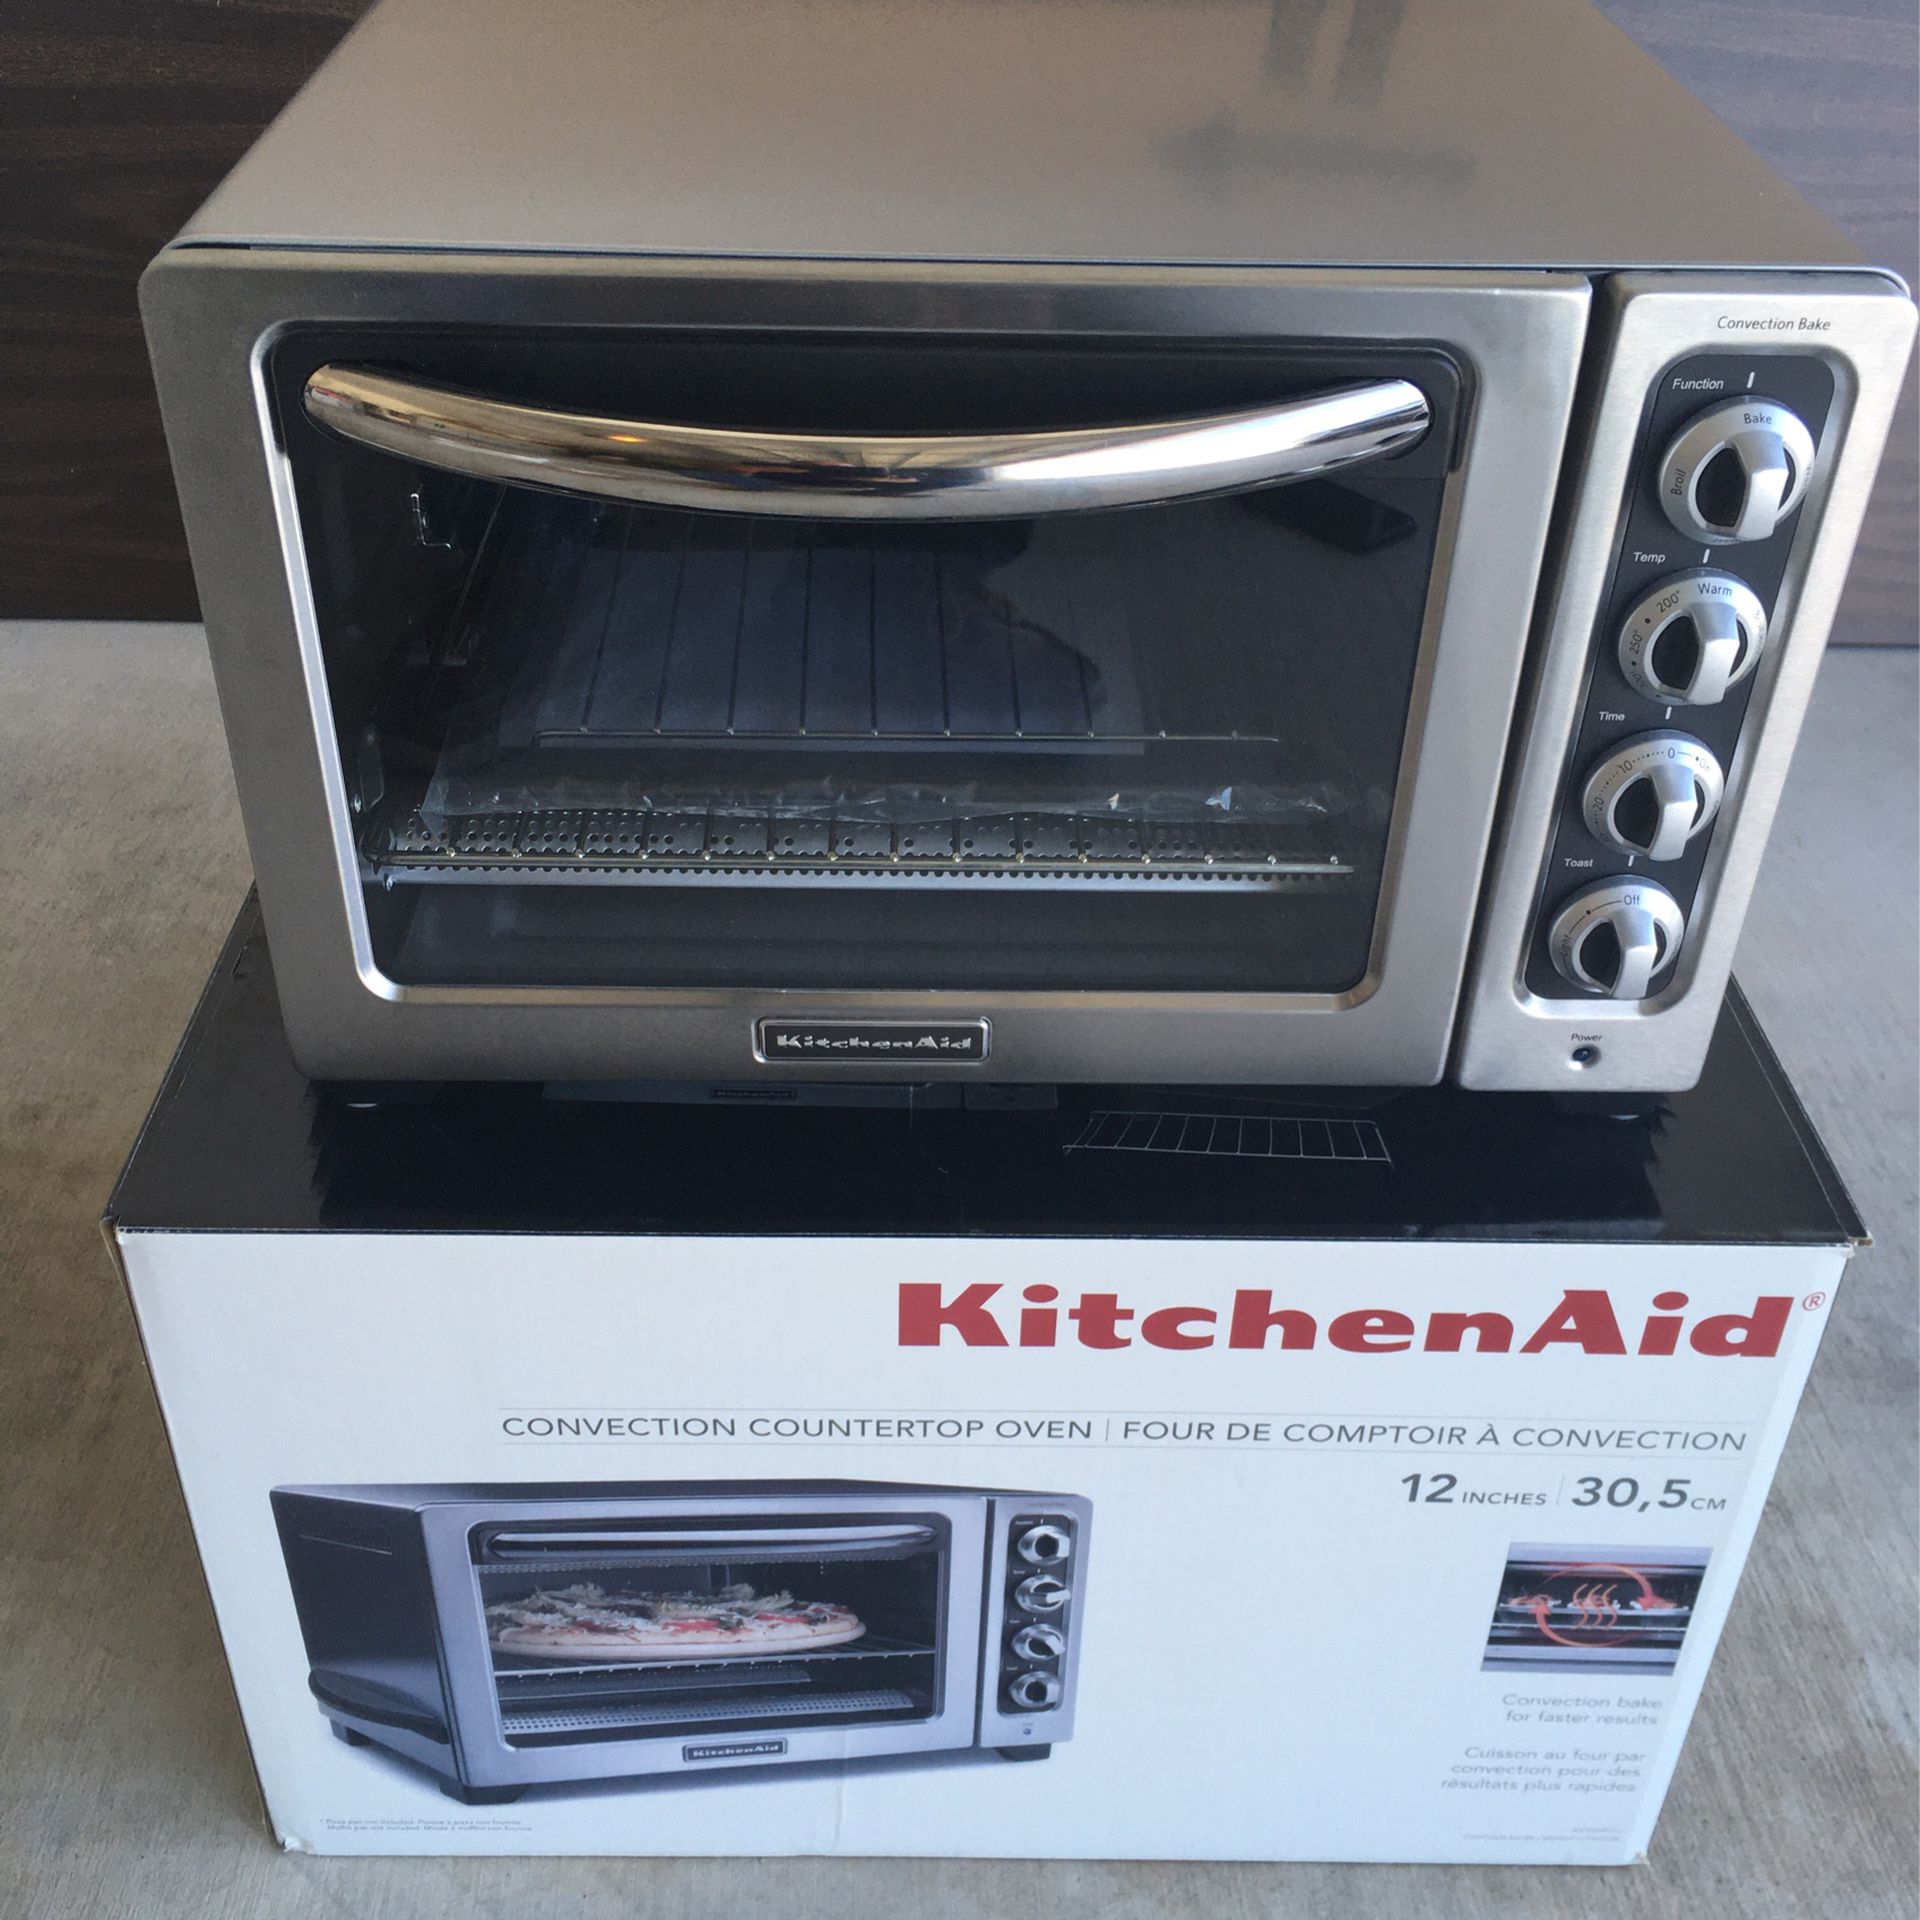 Kitchen Aid Convection Countertop Oven